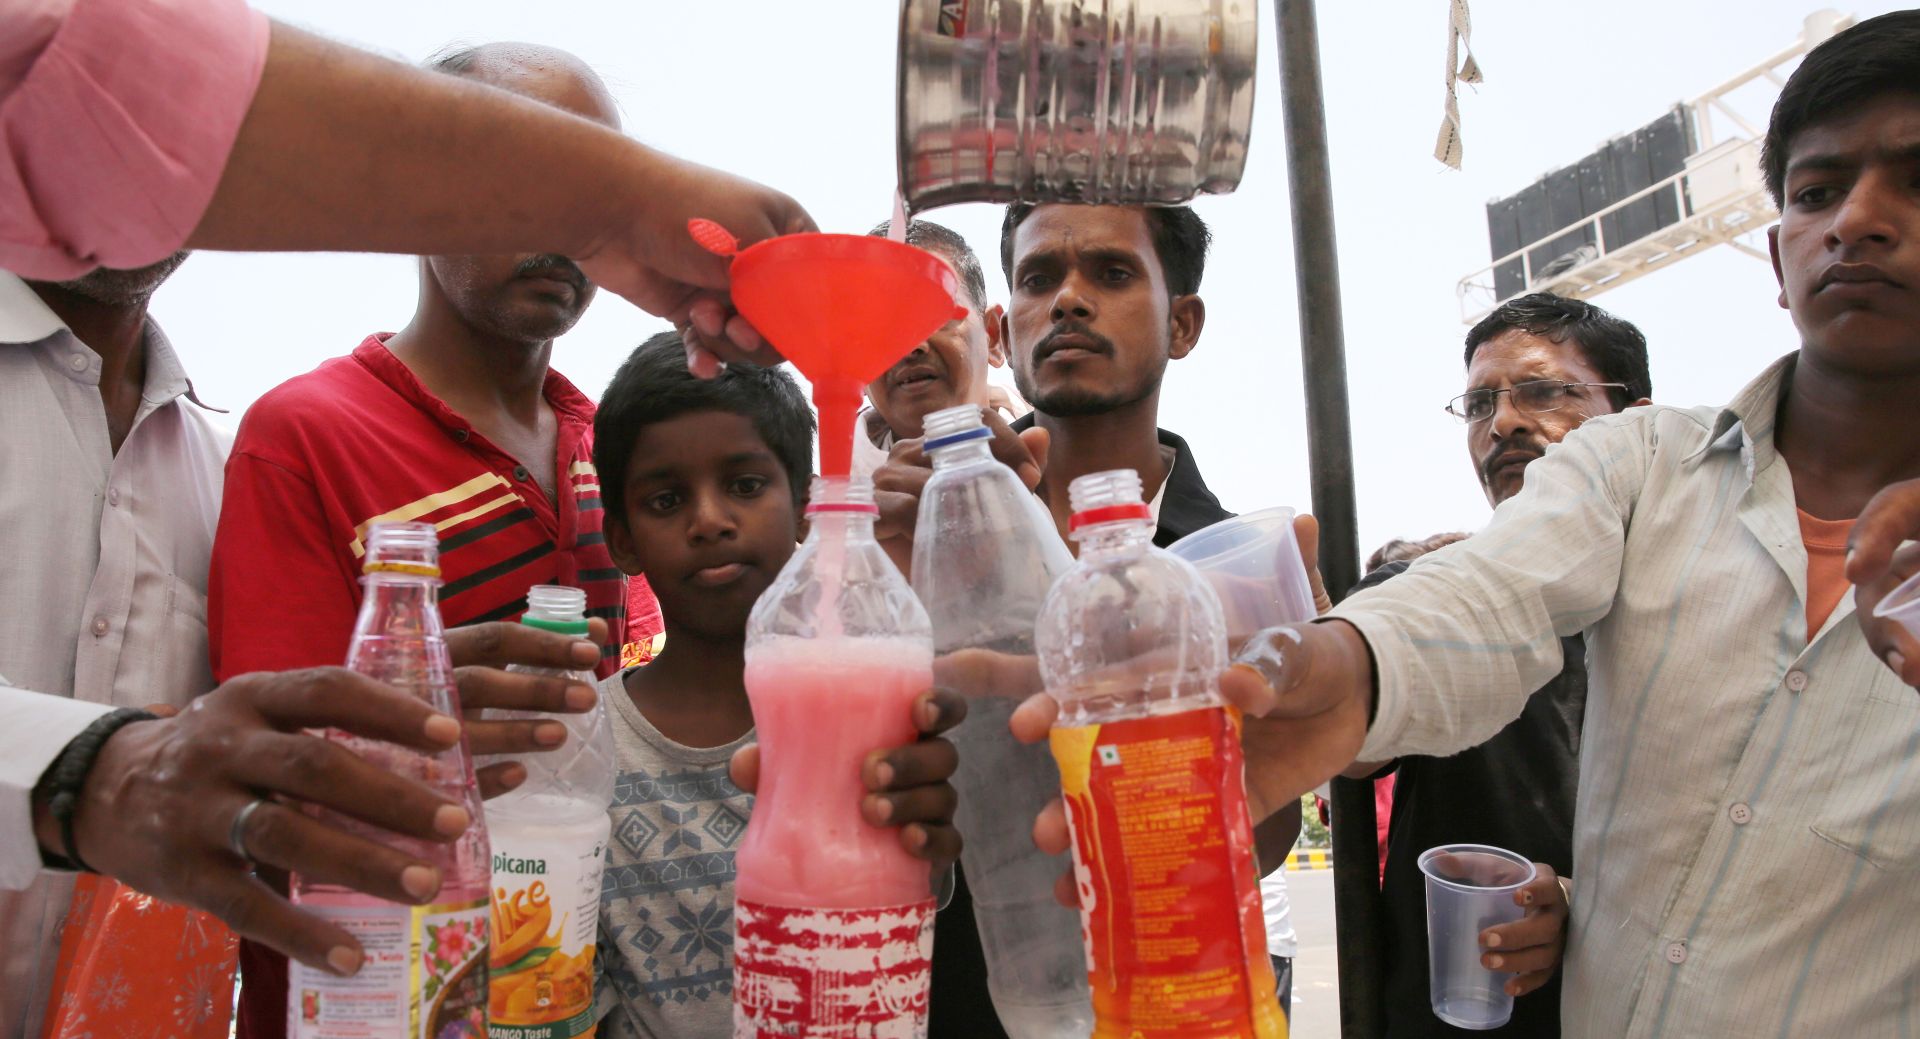 epa07631929 Indian volunteers offer sweet drinks to people on the occasion of the martyrdom day of the Guru Arjan Dev, the fifth Sikh Guru, on a hot day, in New Delhi, India, 07 June 2019. The region is witnessing intense heat wave conditions with peak temperature cross the 45 degrees Celsius.  EPA/RAJAT GUPTA